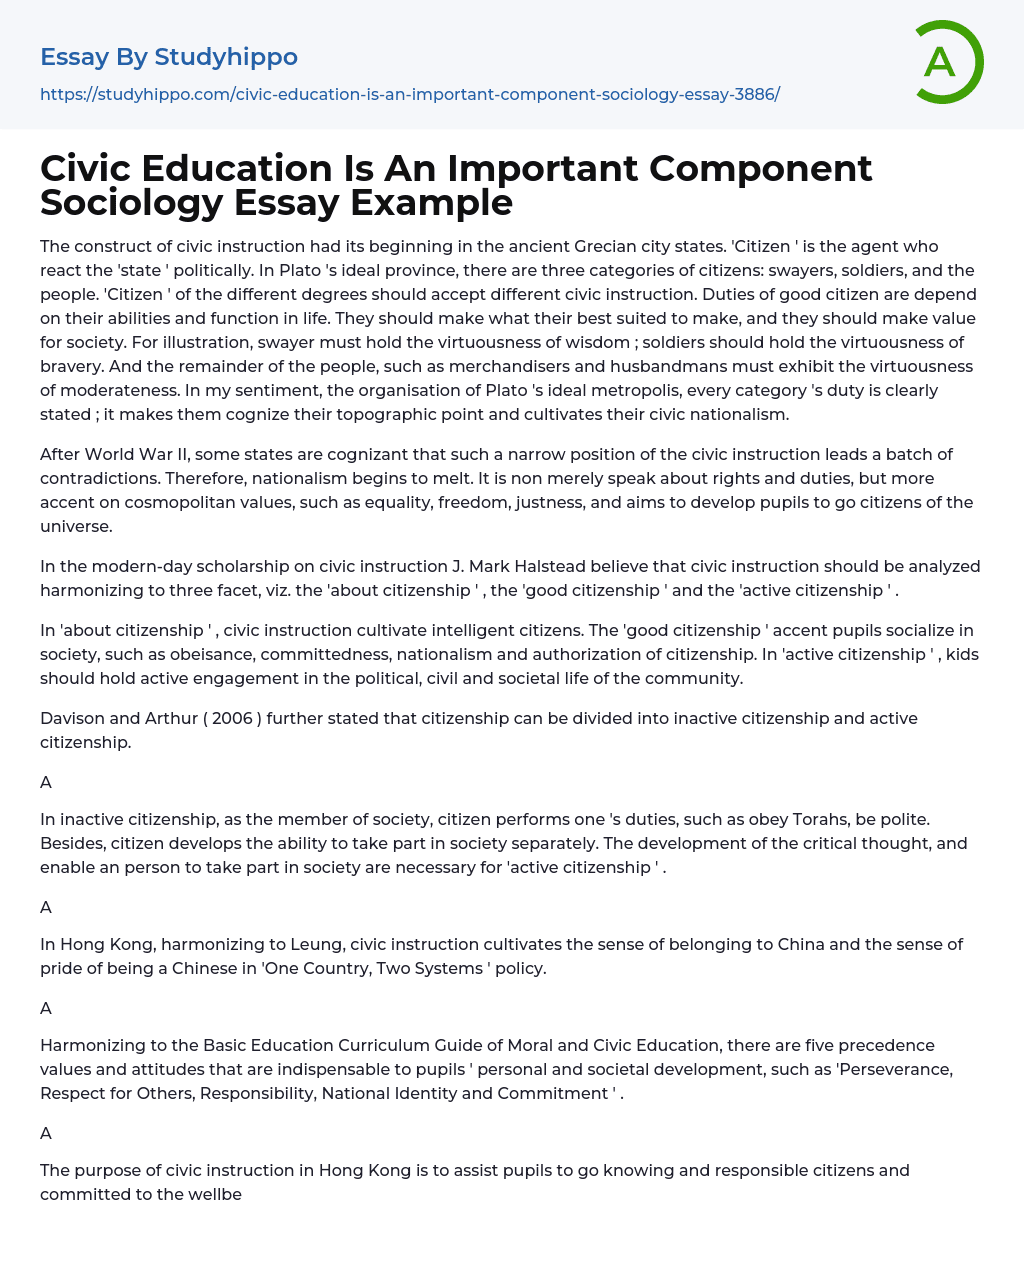 Civic Education Is An Important Component Sociology Essay Example